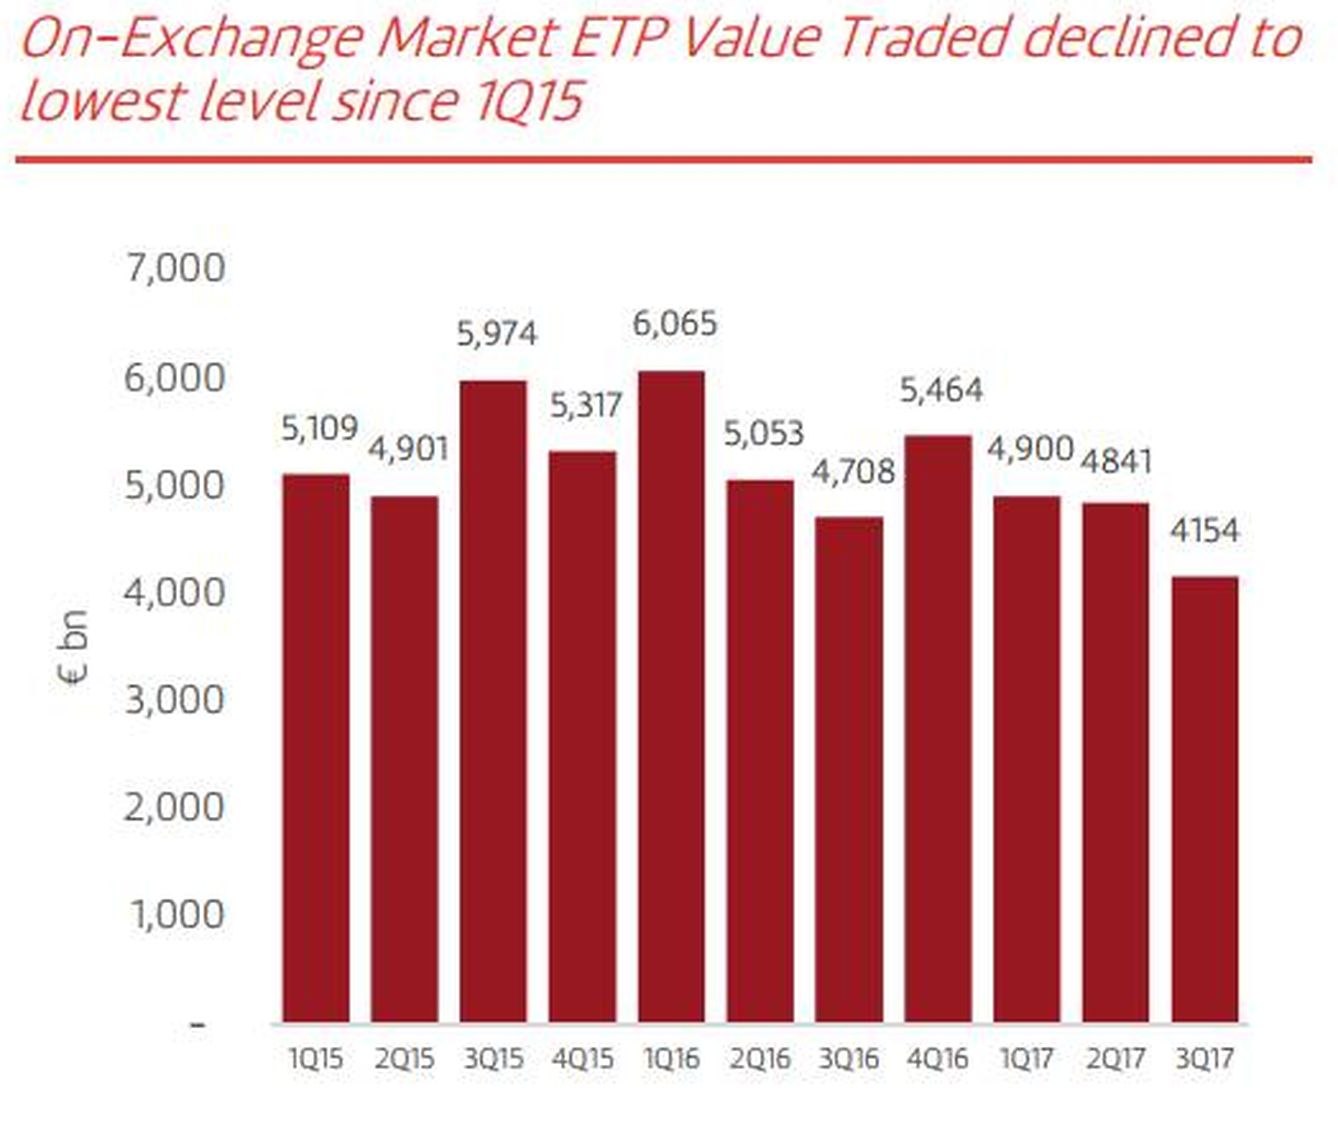 ETPs 'value traded' - Flow Traders 3Q17